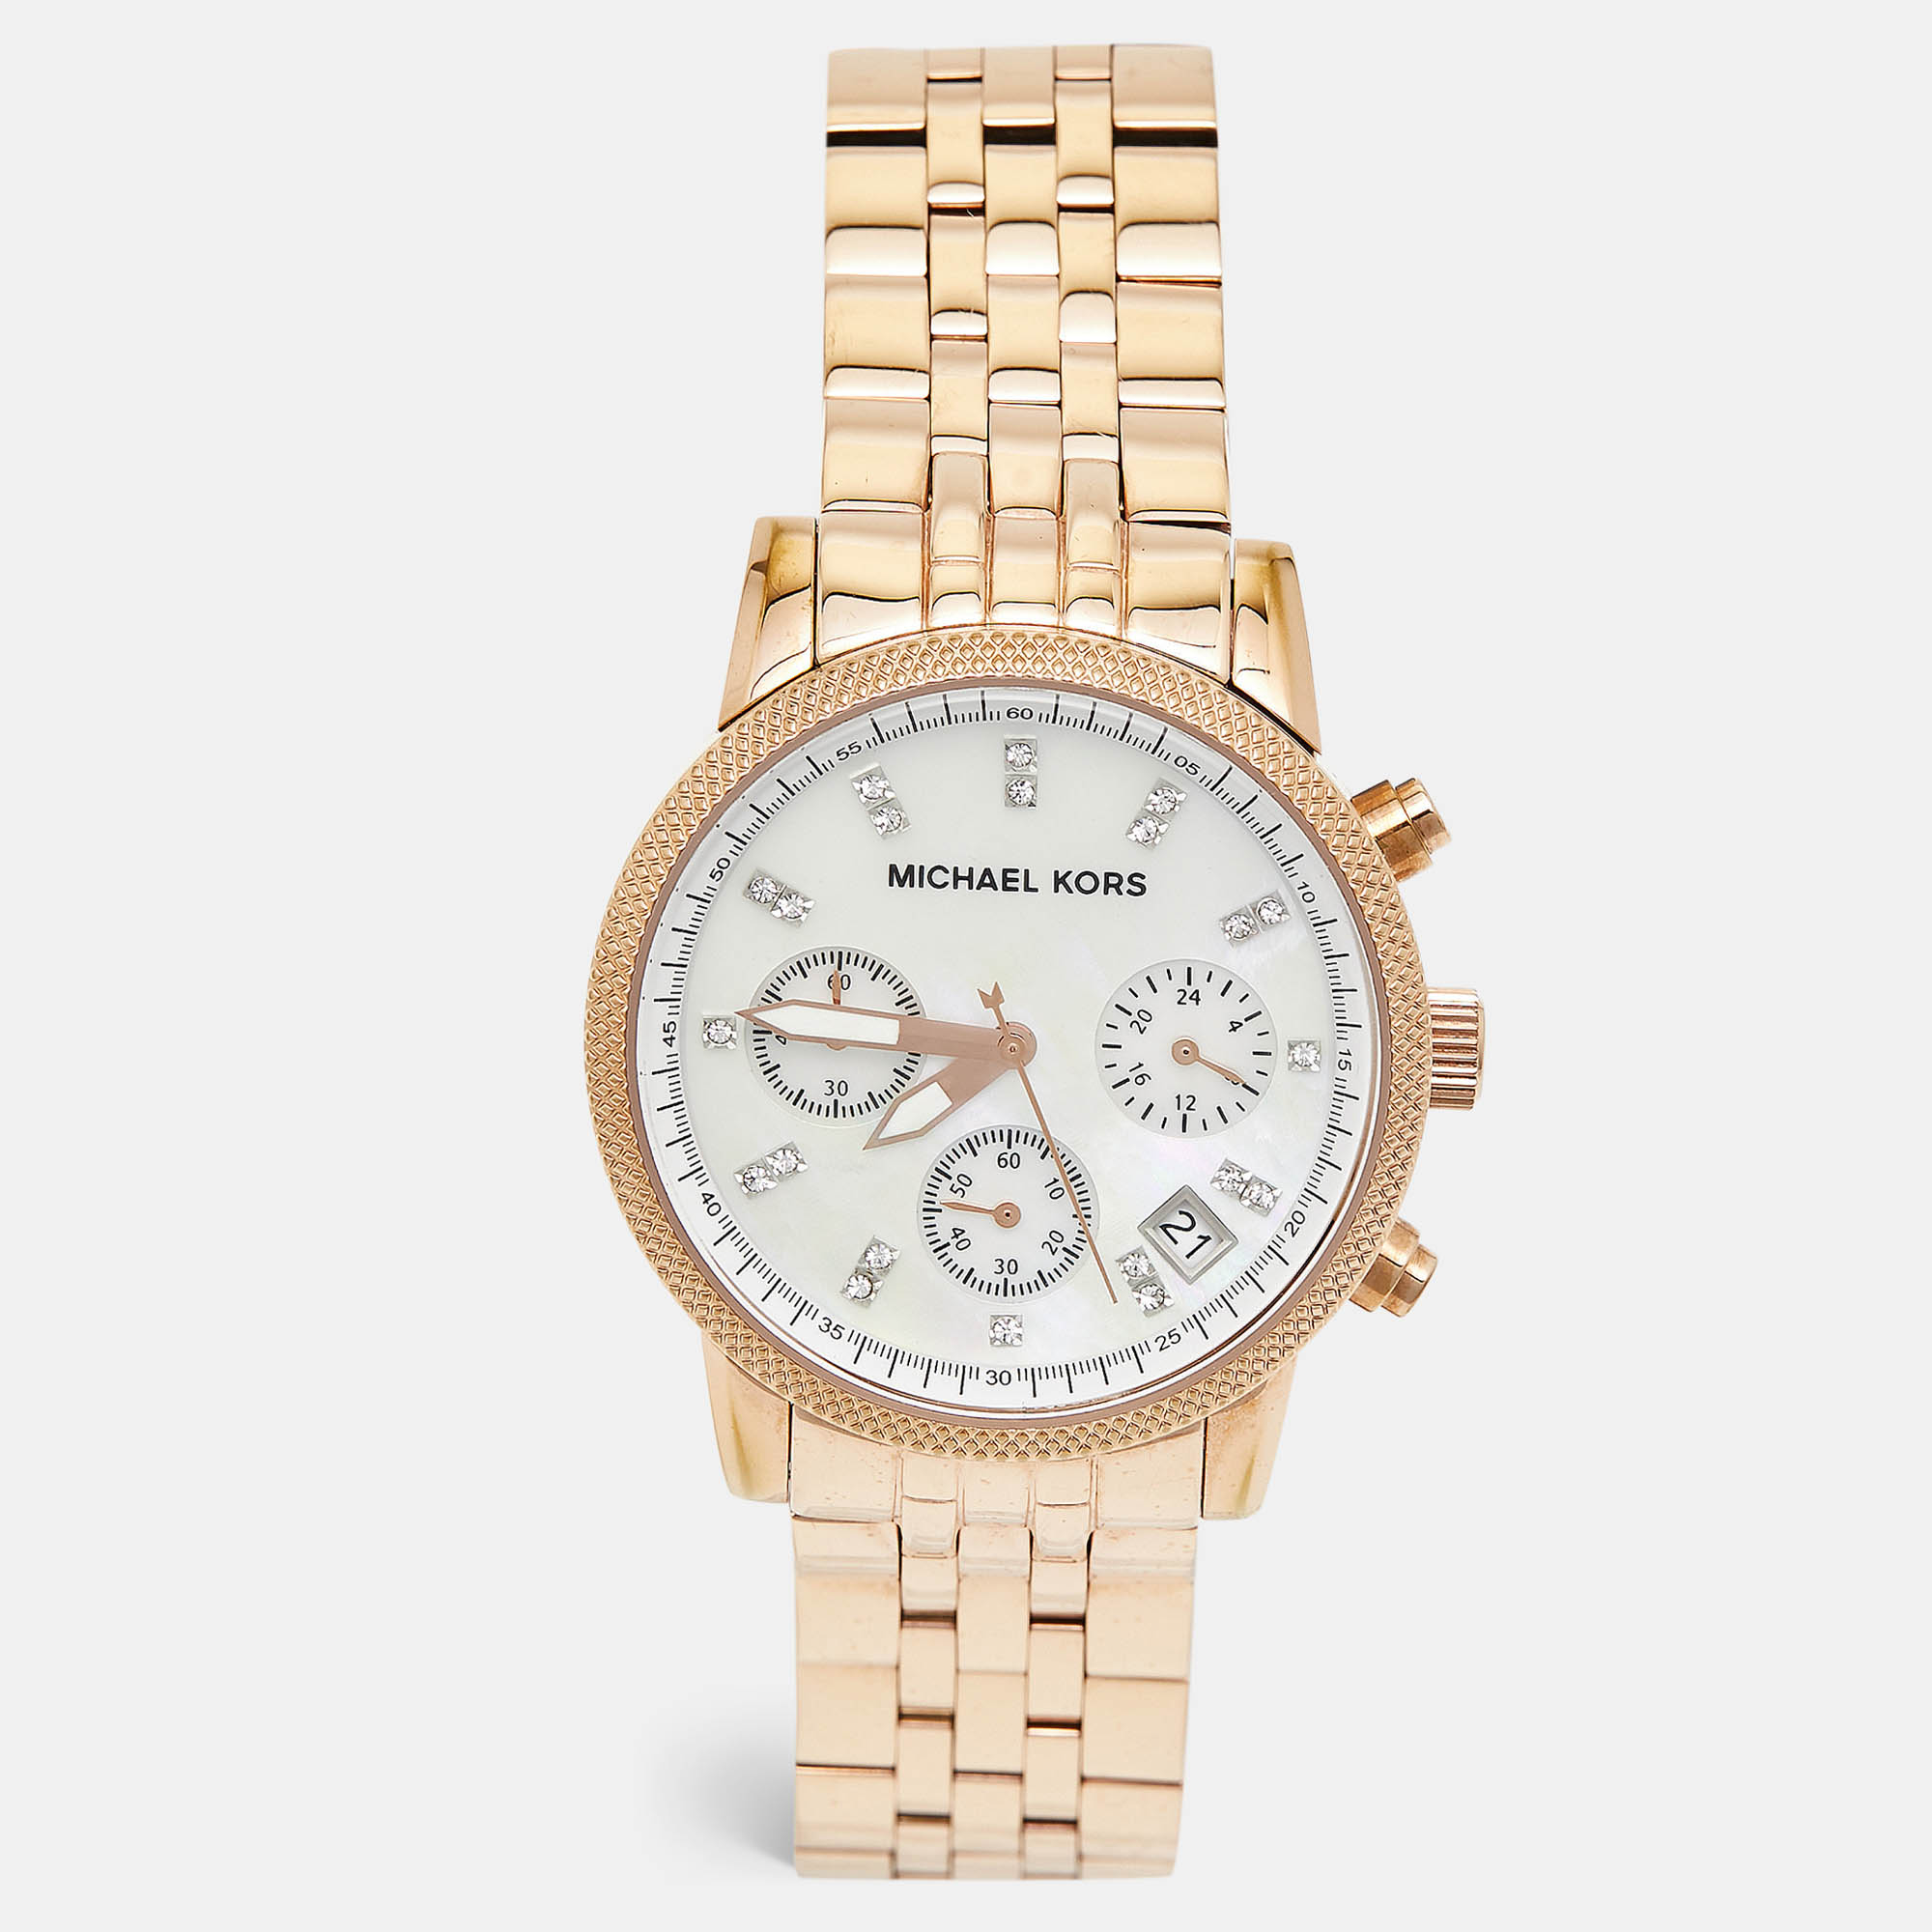 

Michael Kors Mother of Pearl Rose Gold Plated Stainless Steel Jet Set MK5026 Women's Wristwatch, White